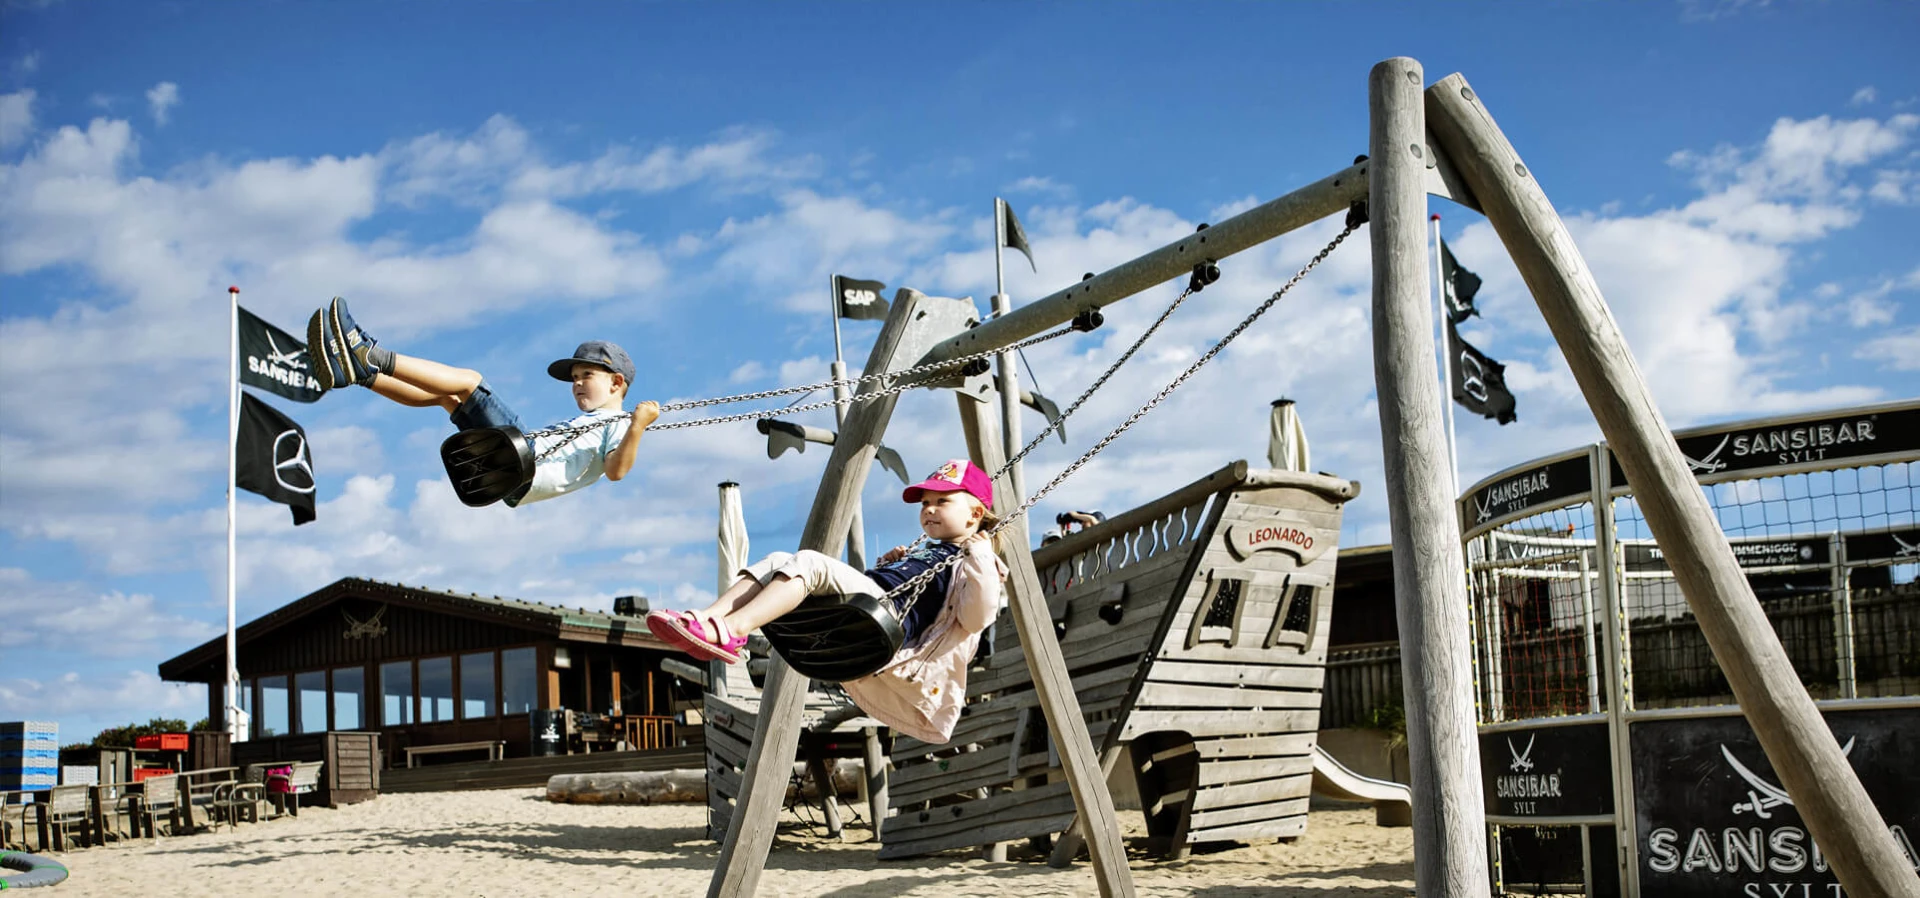 children playing on a wooden swing playground hero image